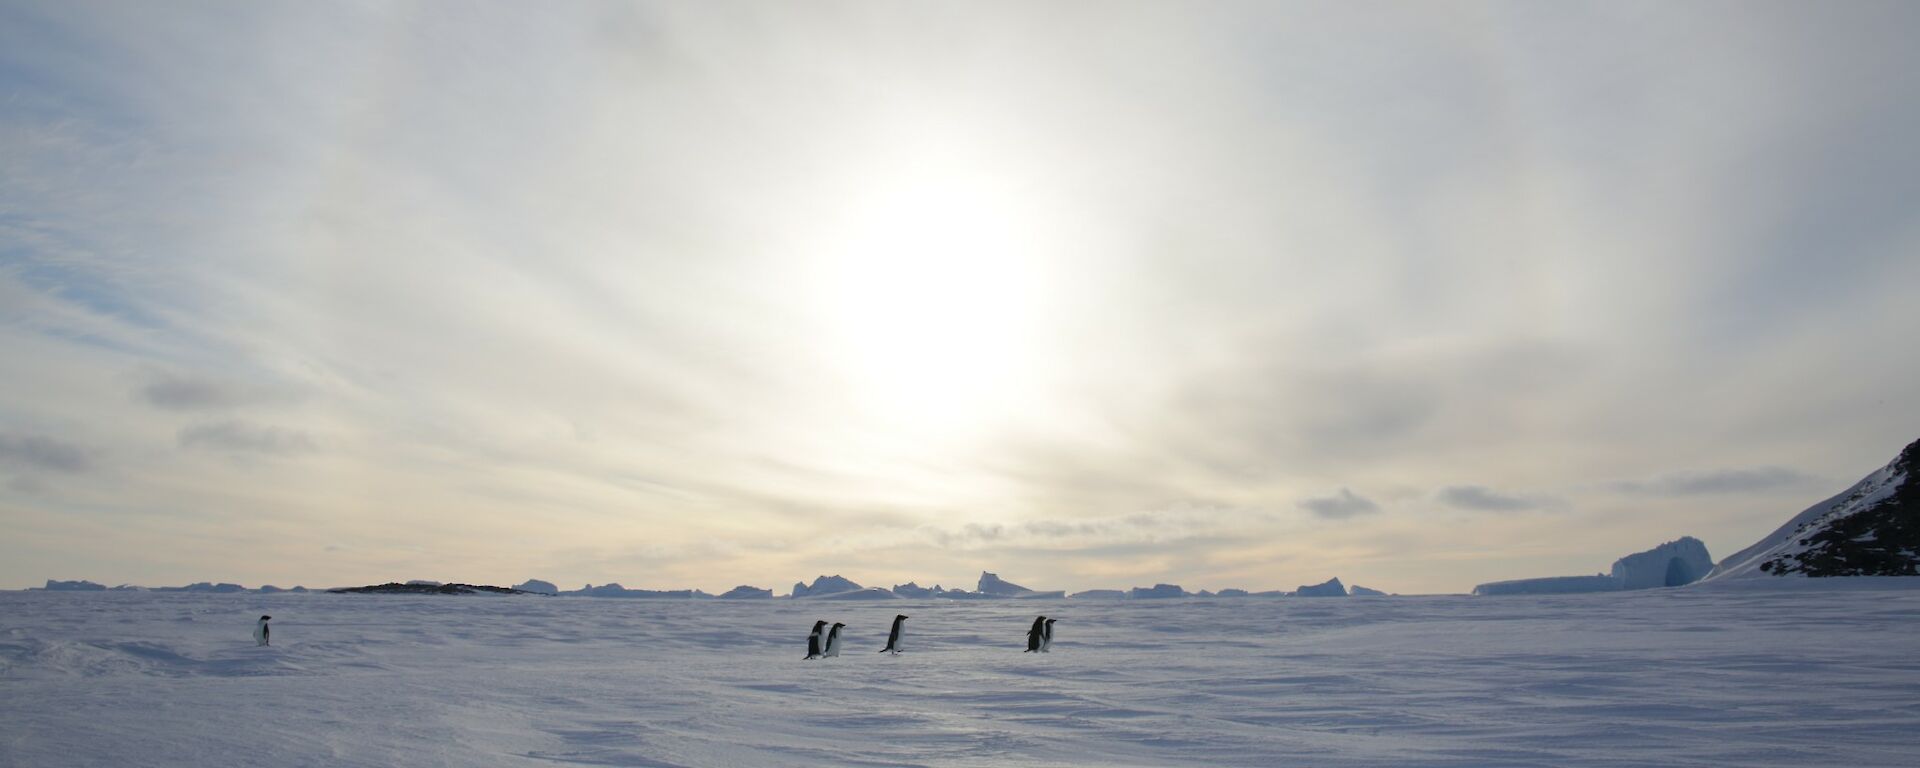 Adelie pengiuns on the sea ice returning to their breeding grounds on the islands off Davis